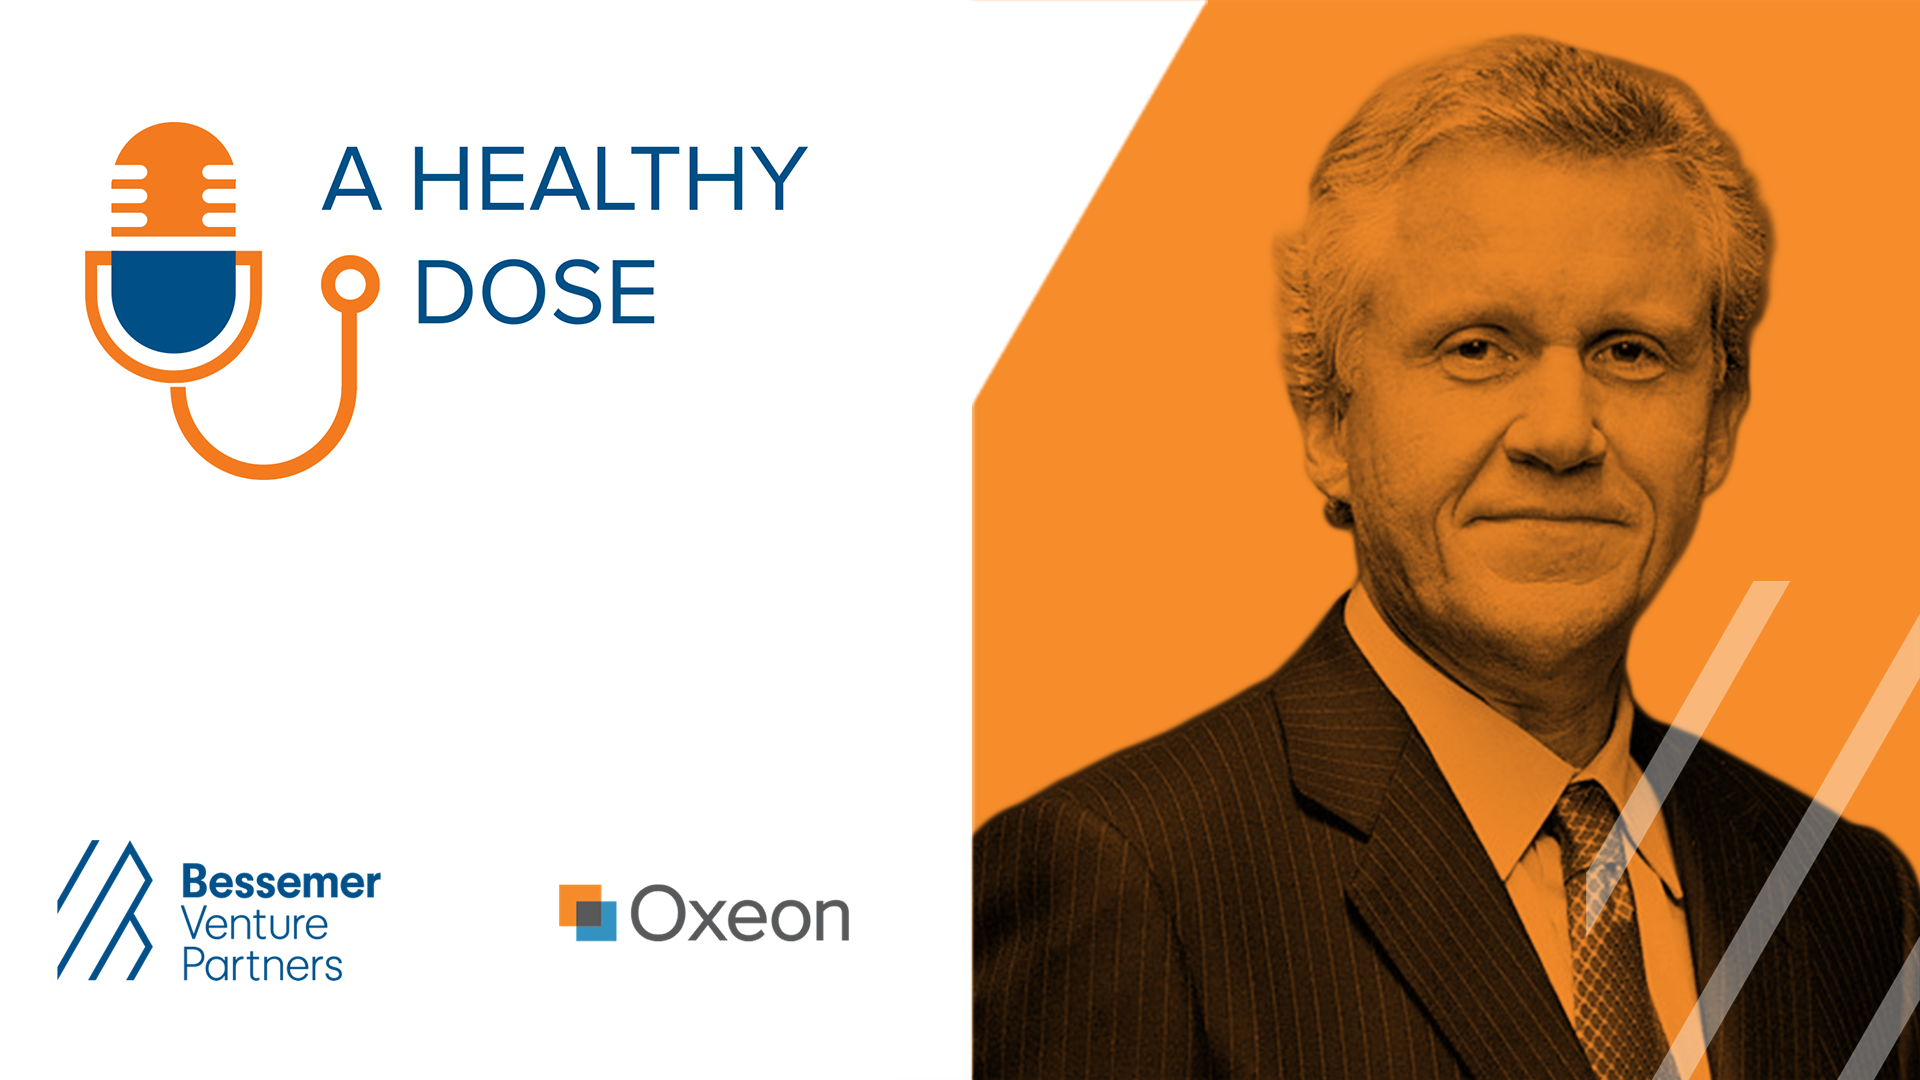 Jeff Immelt on A Healthy Dose